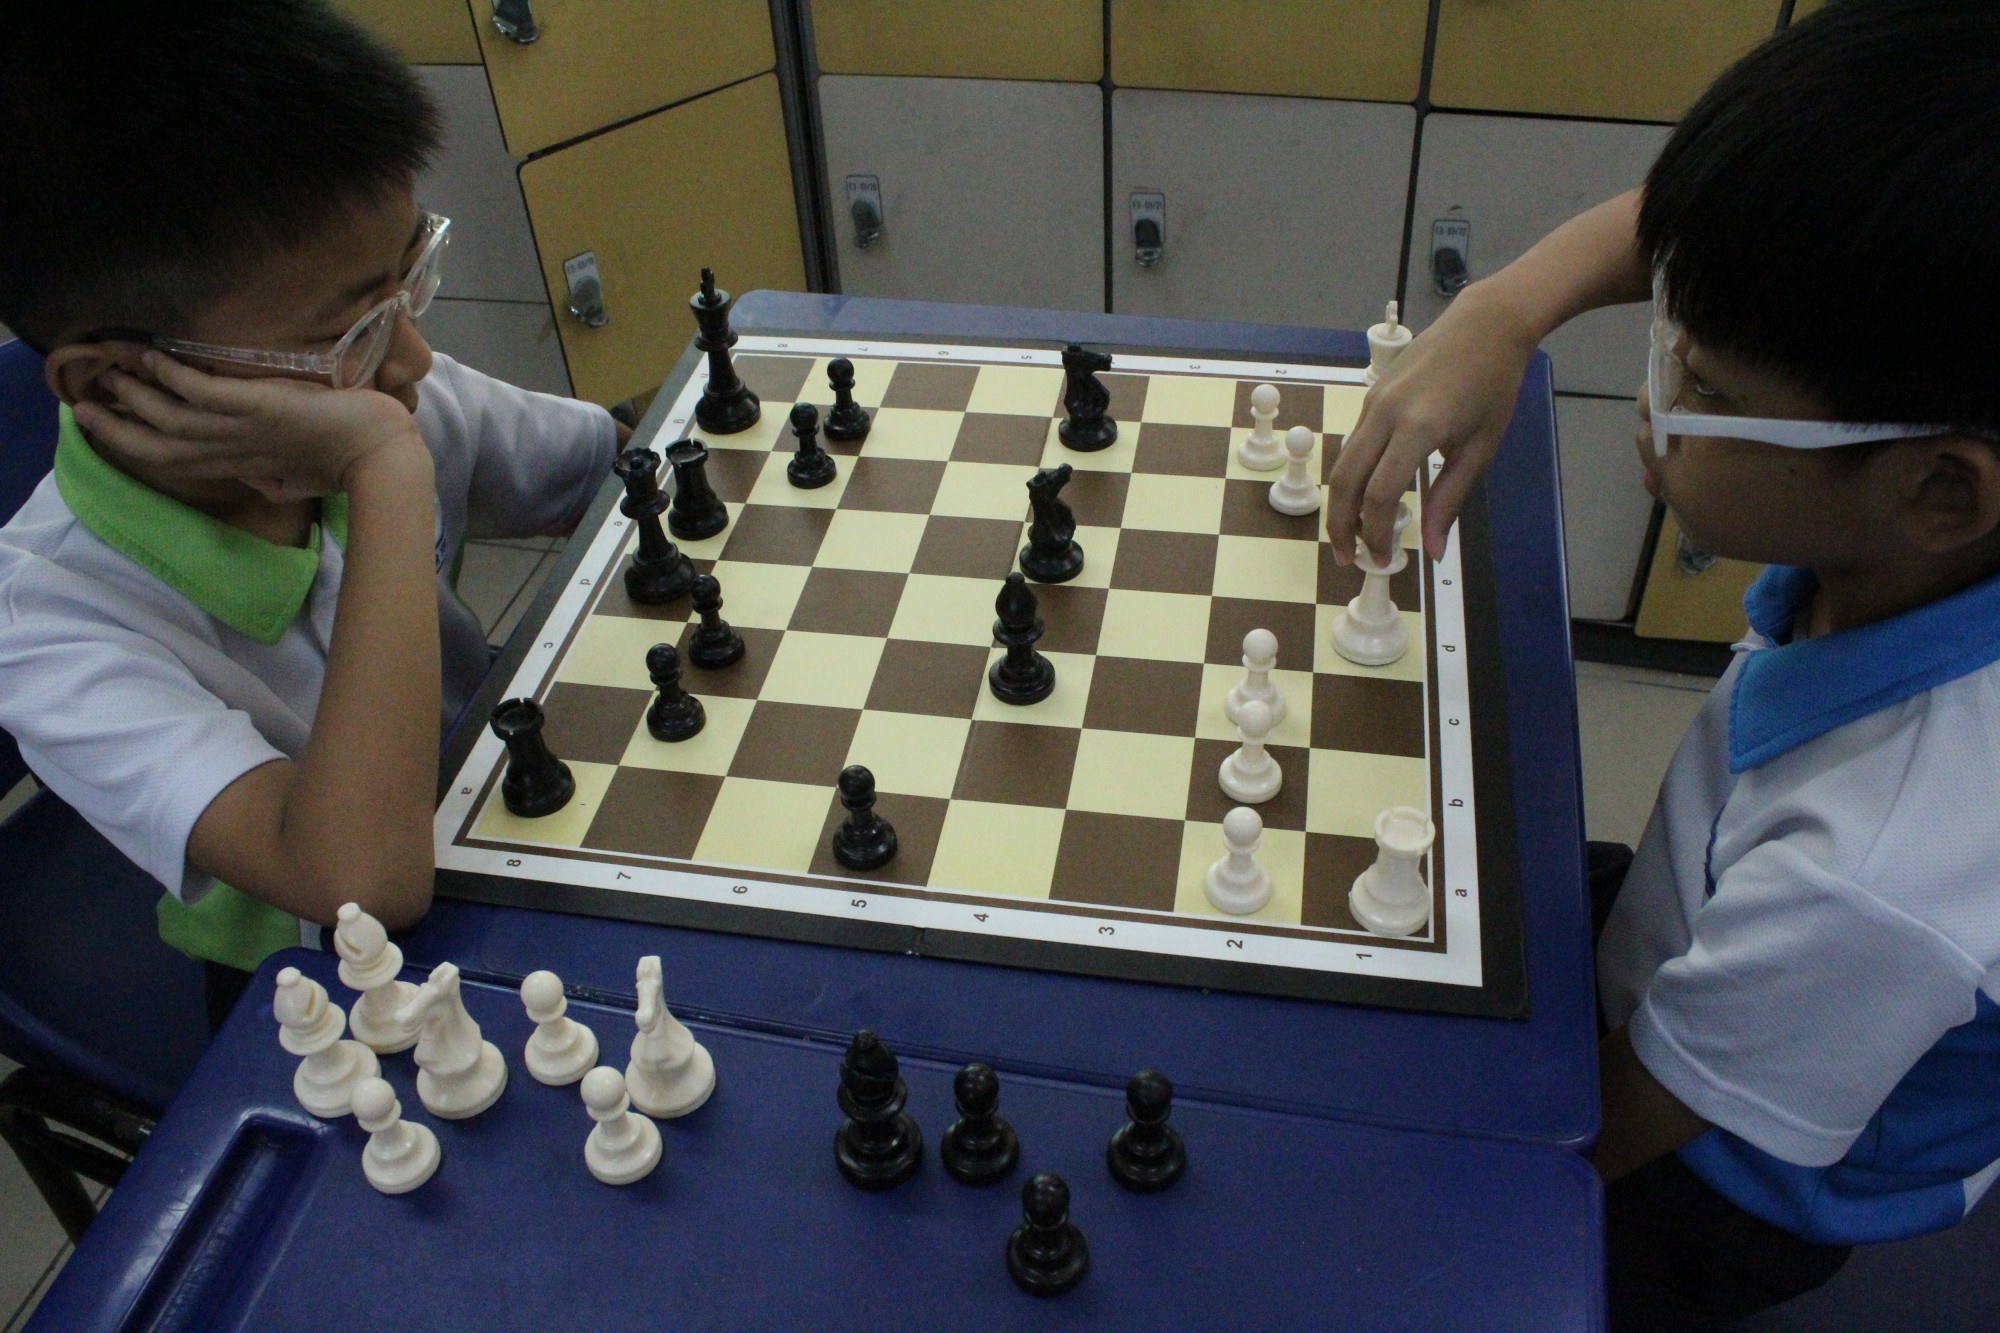 Learning chess together develops mutual respect and friendship